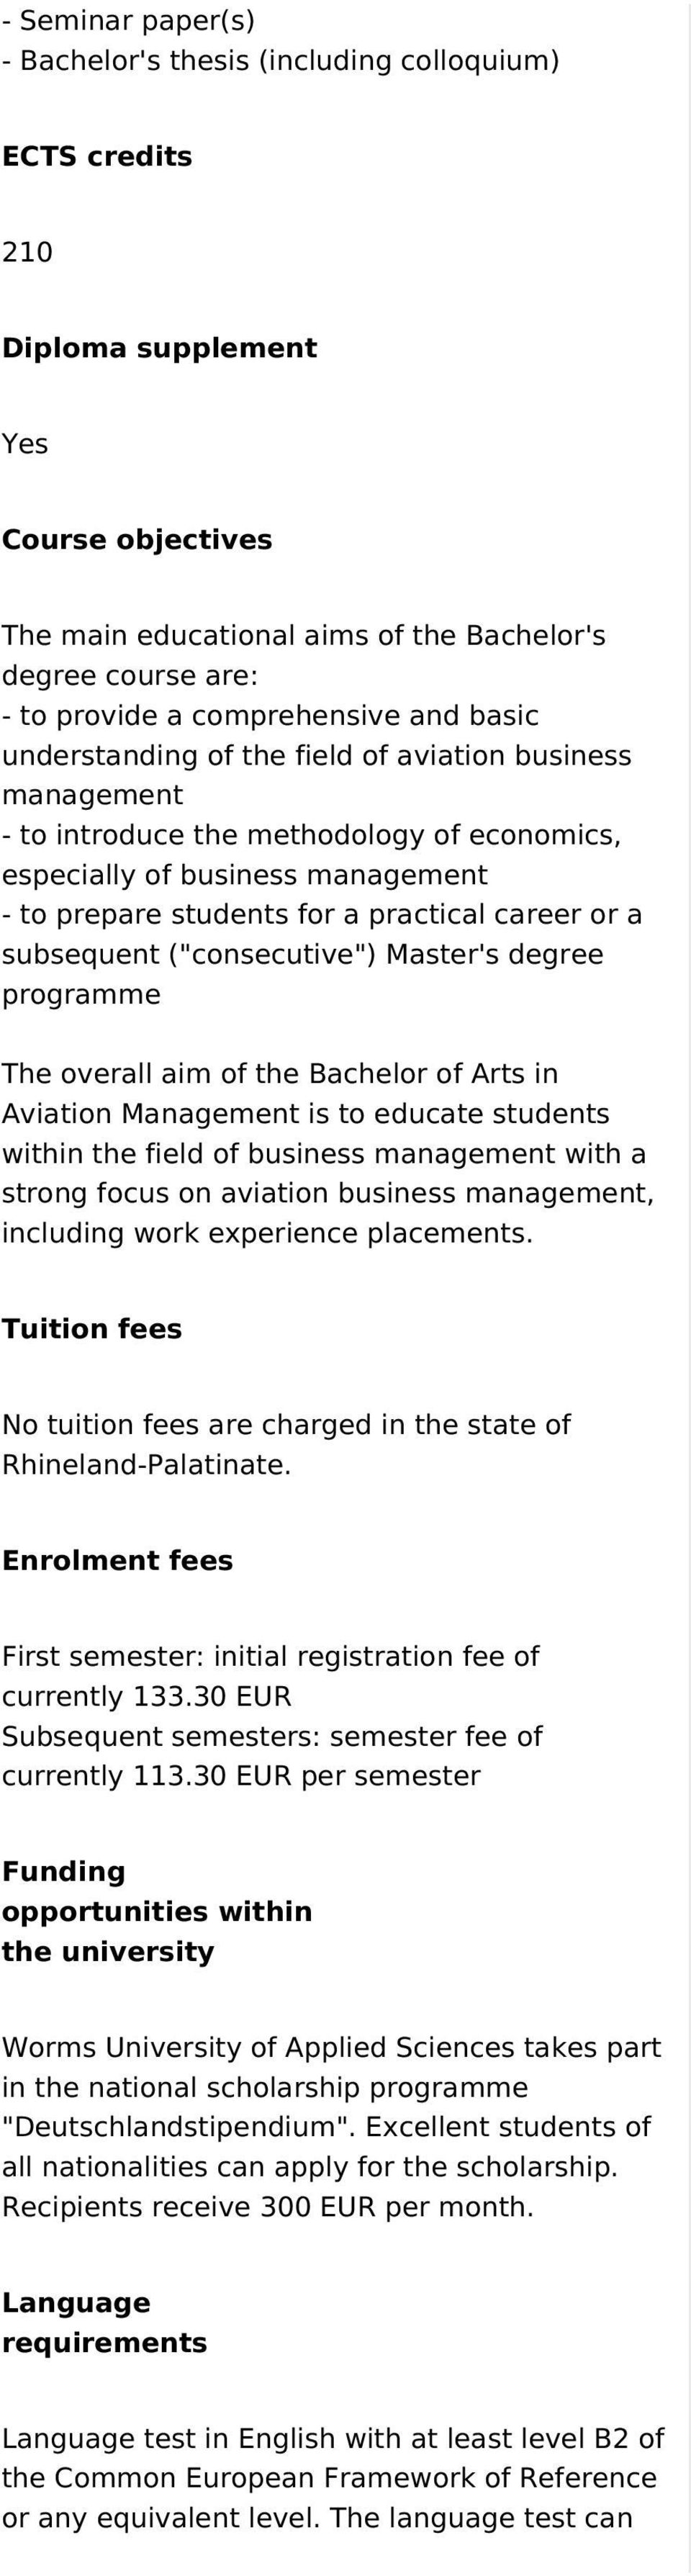 or a subsequent ("consecutive") Master's degree programme The overall aim of the Bachelor of Arts in Aviation Management is to educate within the field of business management with a strong focus on